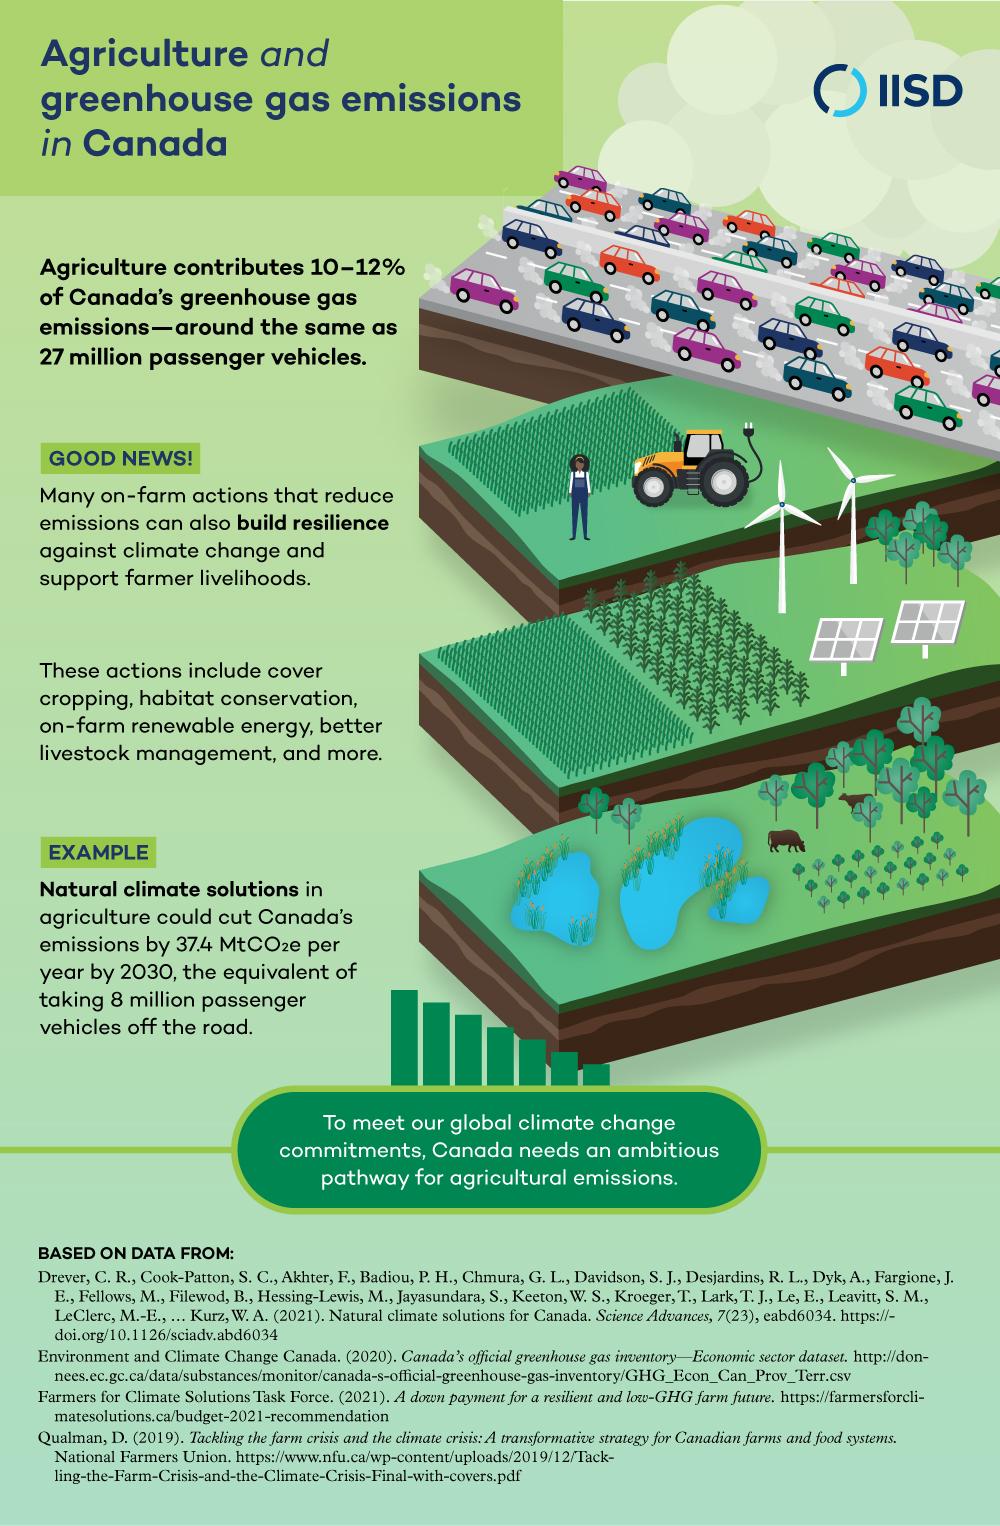 Infographic on agriculture and greenhouse gas emissions in Canada